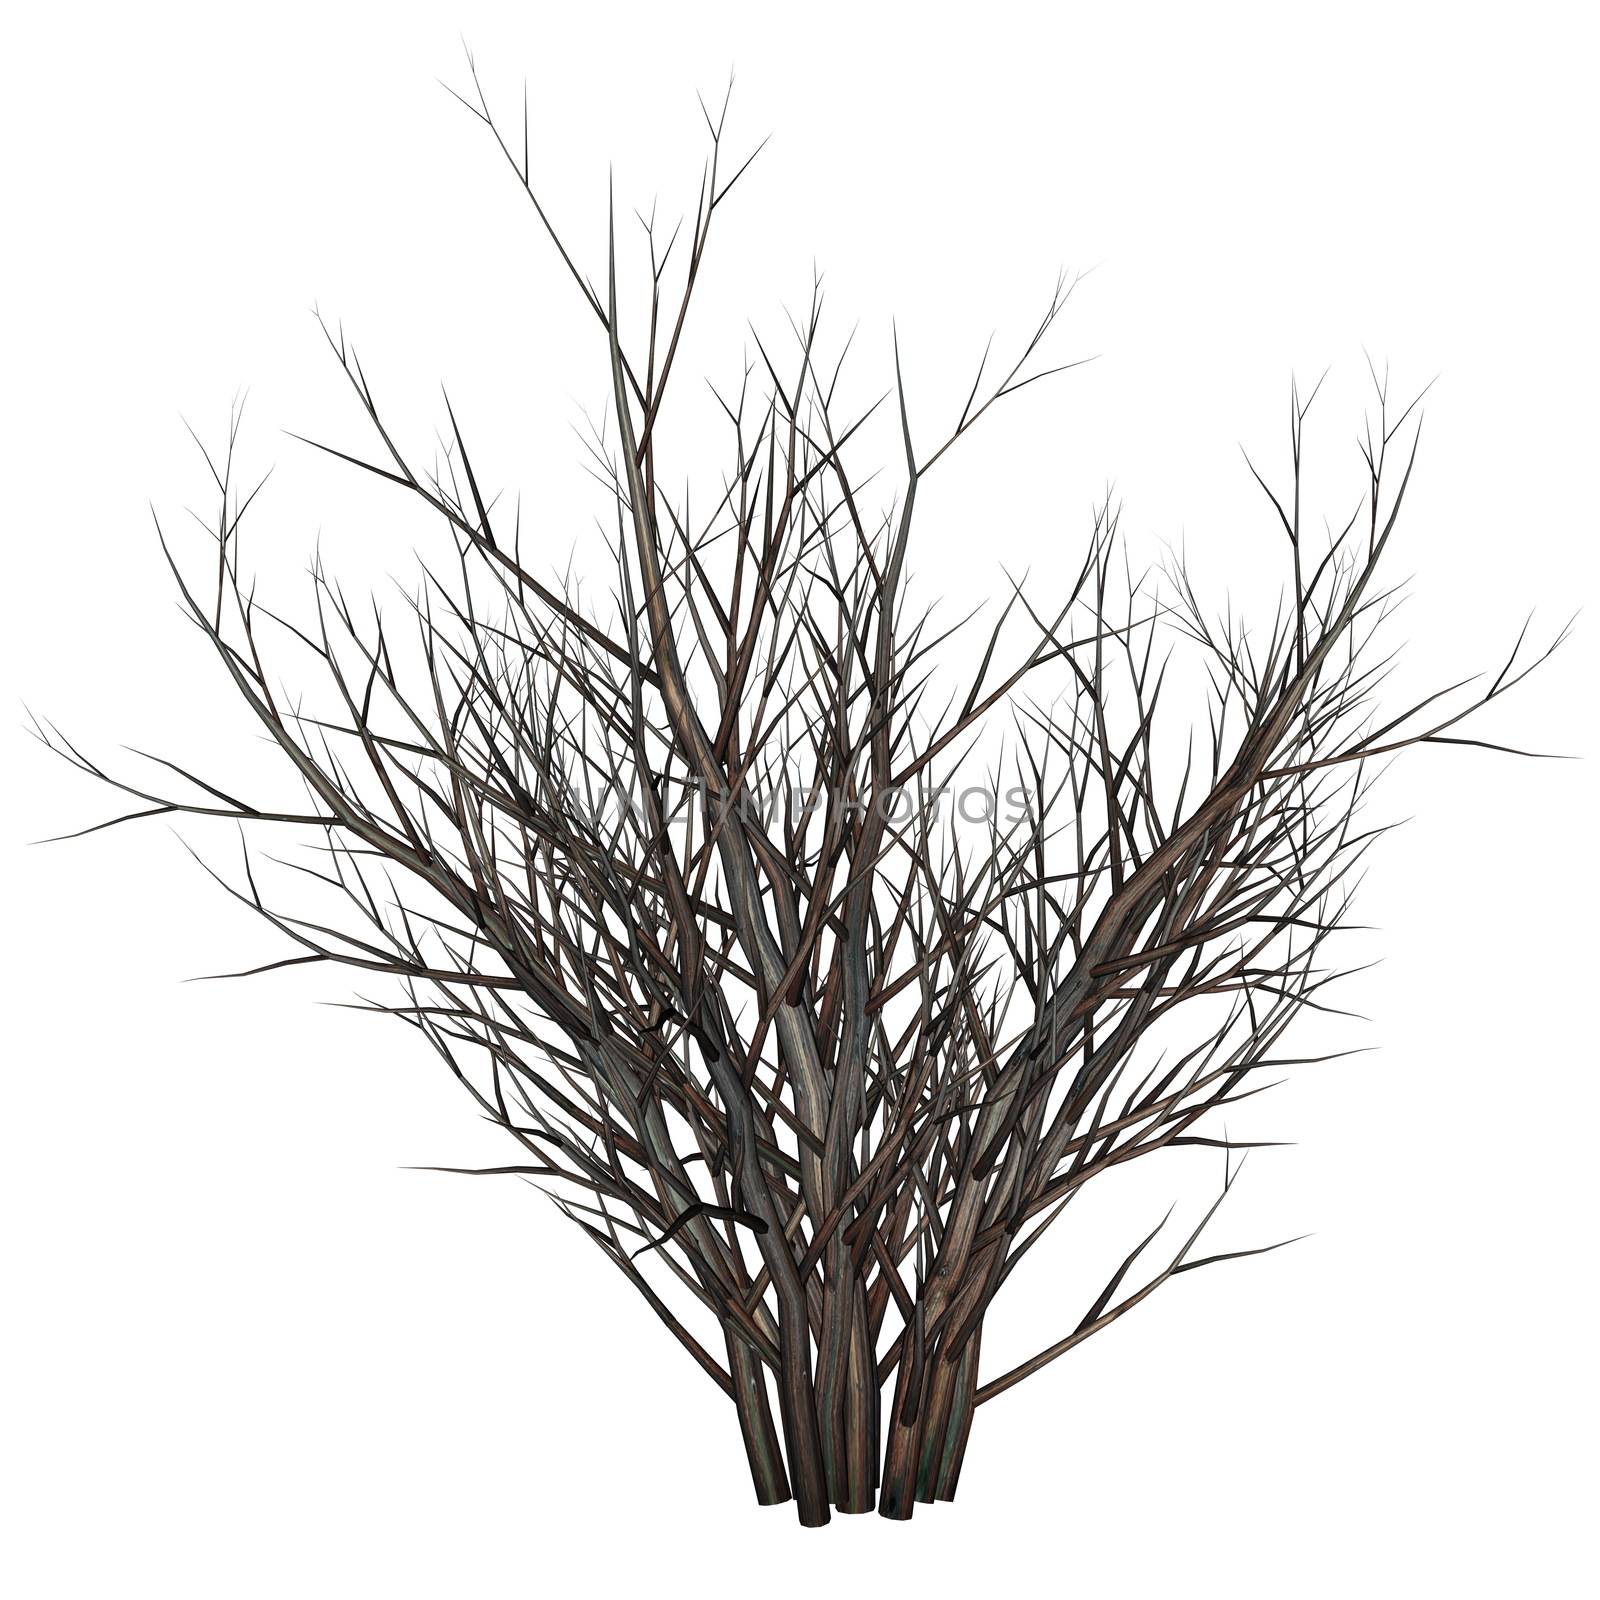 Dead tree bush in the desert with crow raven by night with full moon - 3D render